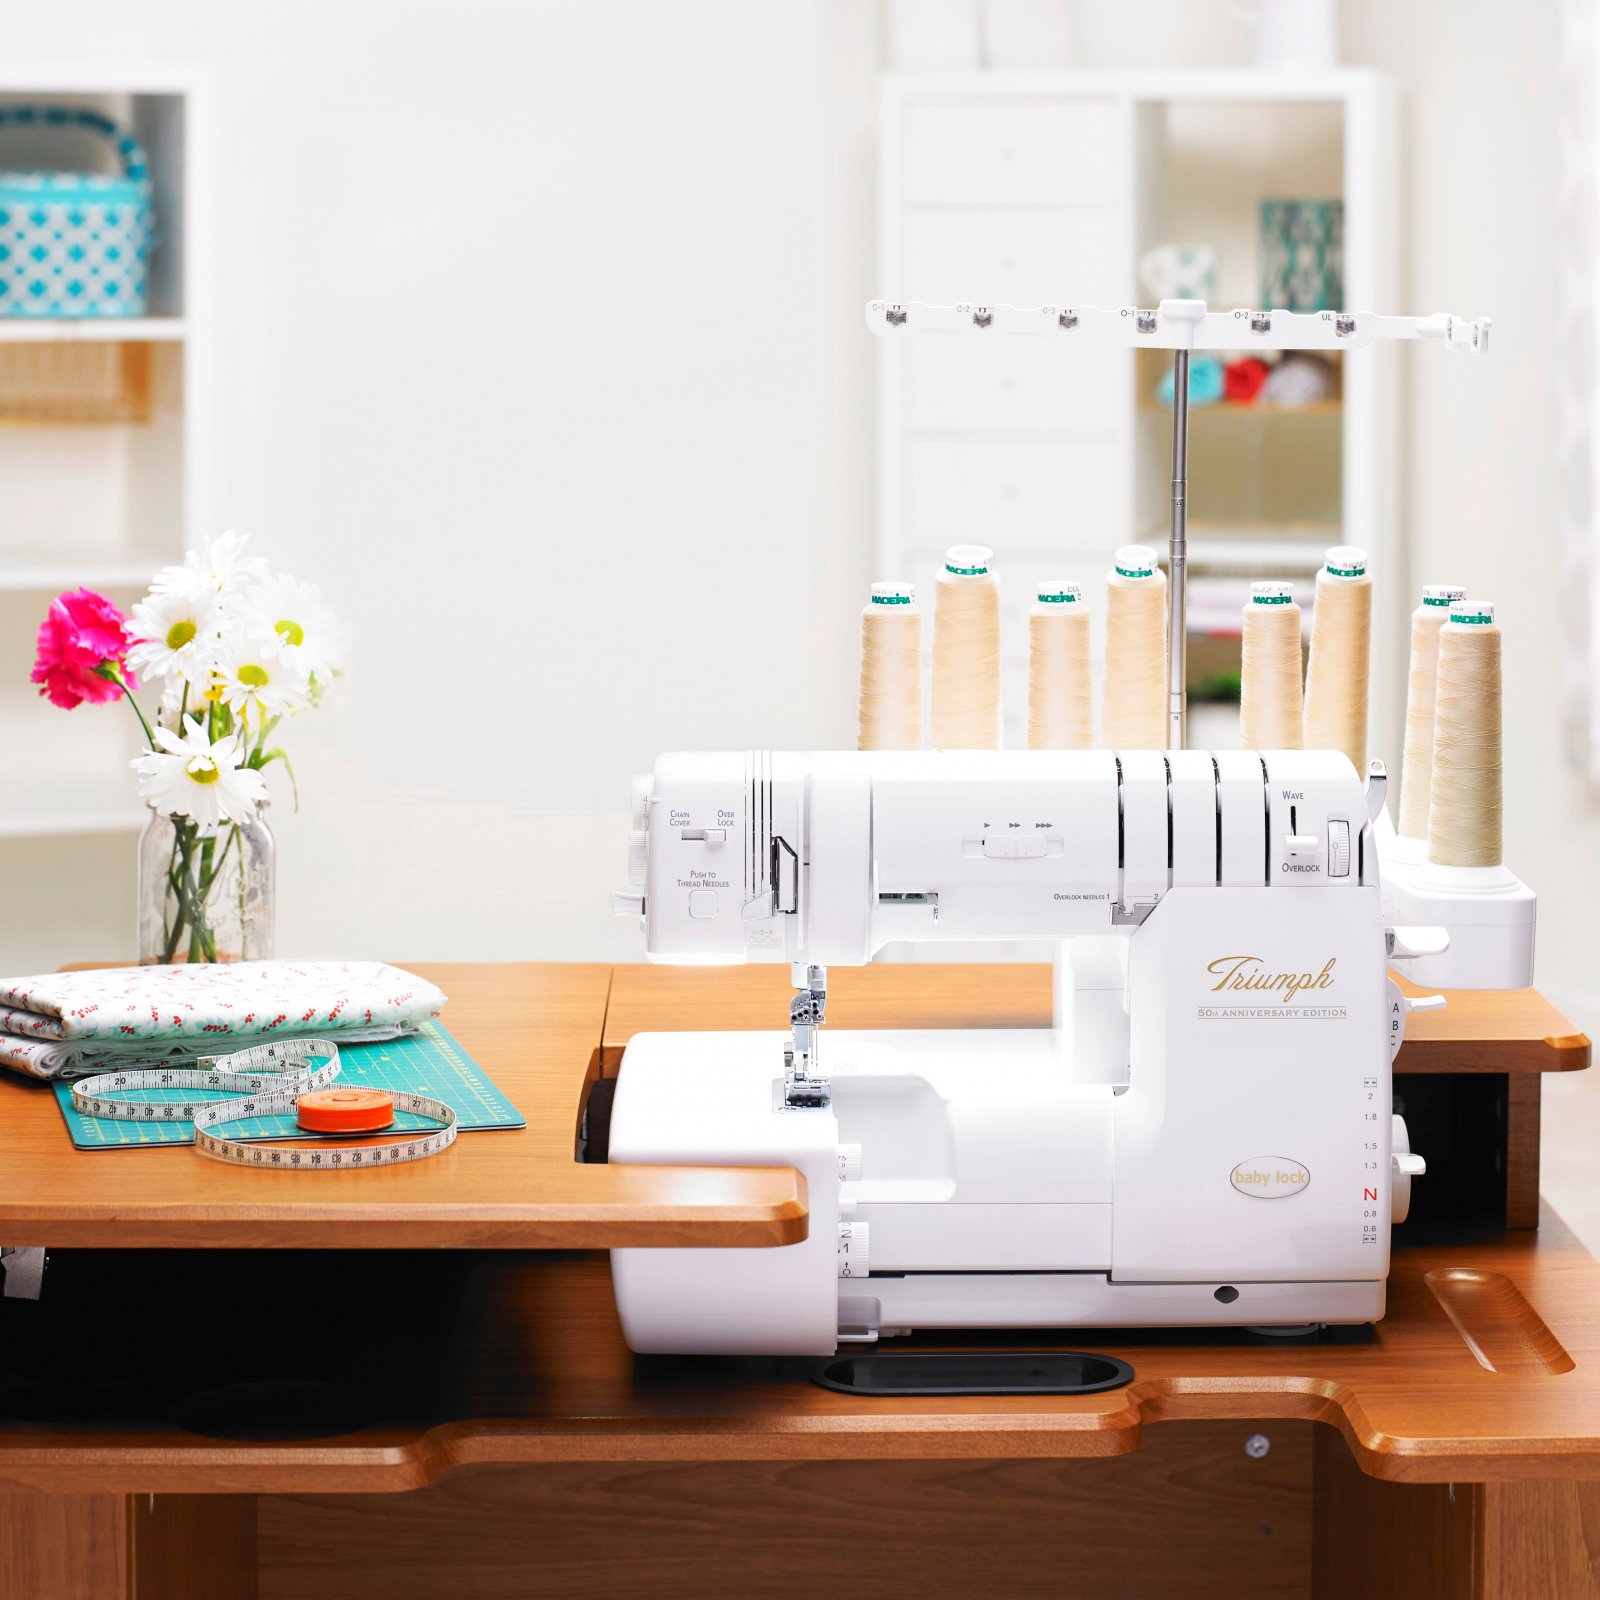 Creative Sewing & Quilting sewing machines